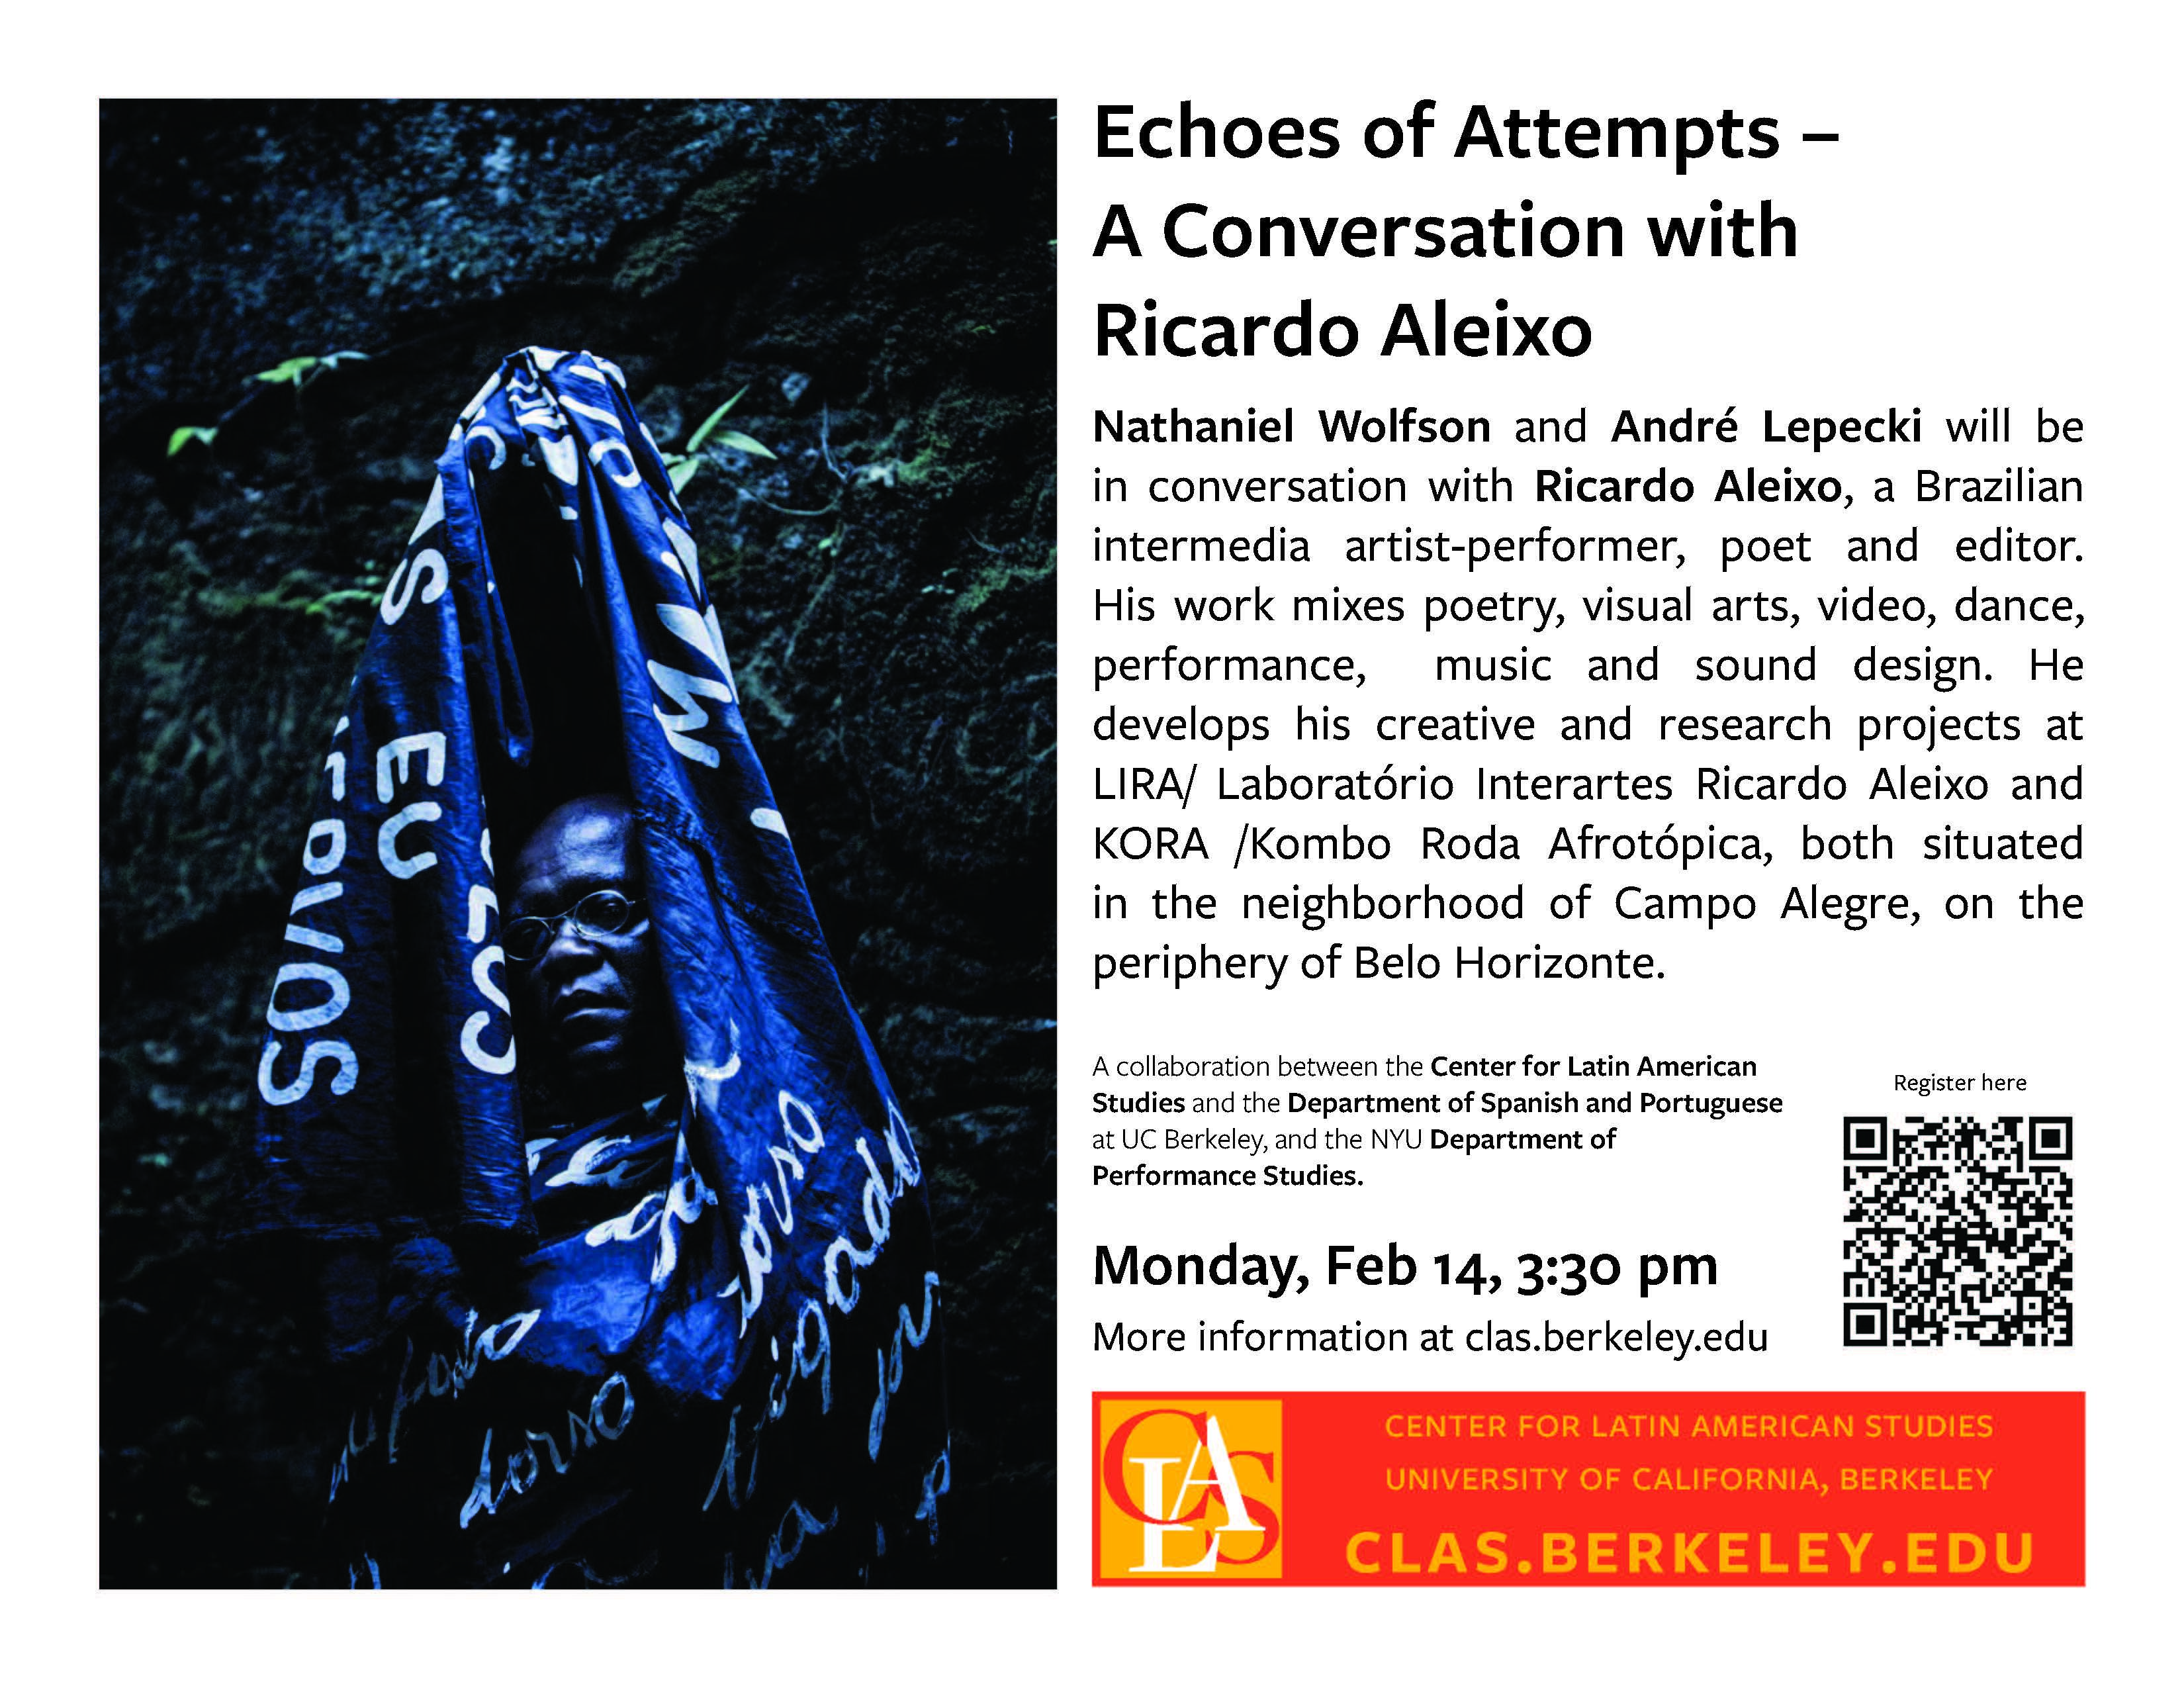 Echoes of Attempts – A Conversation with Ricardo Aleixo